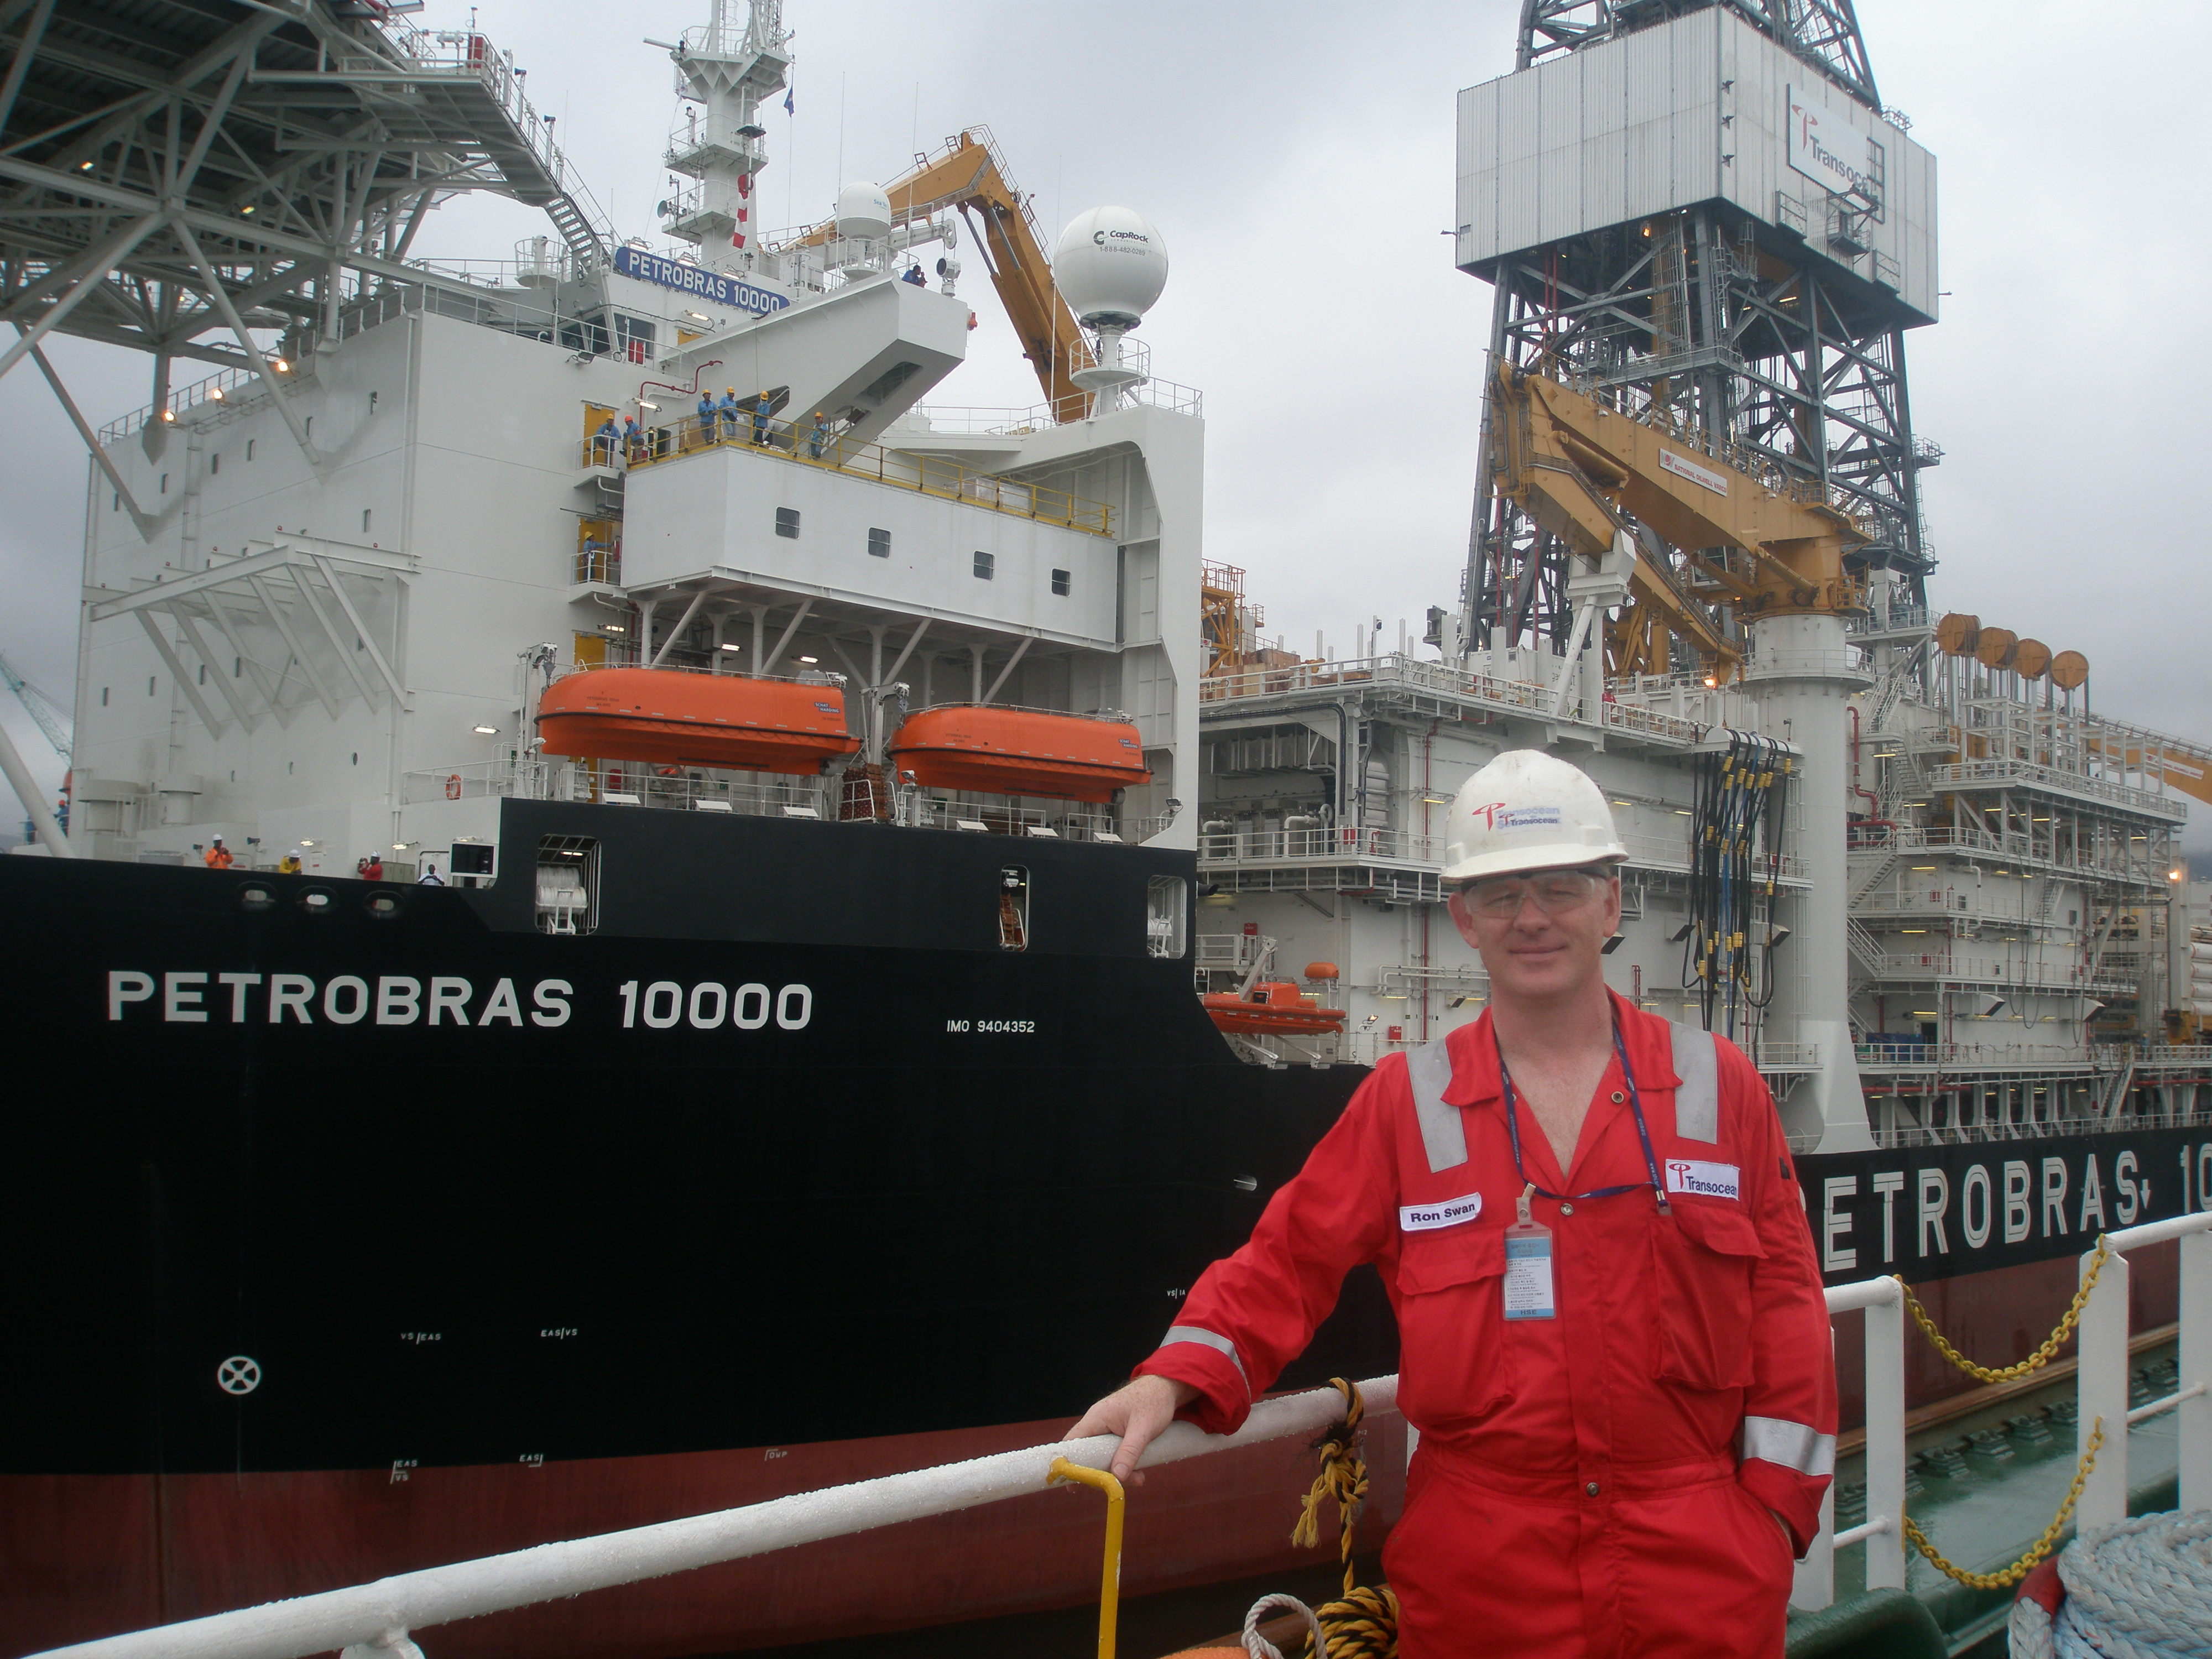 Project Manager for Petrobras 10000